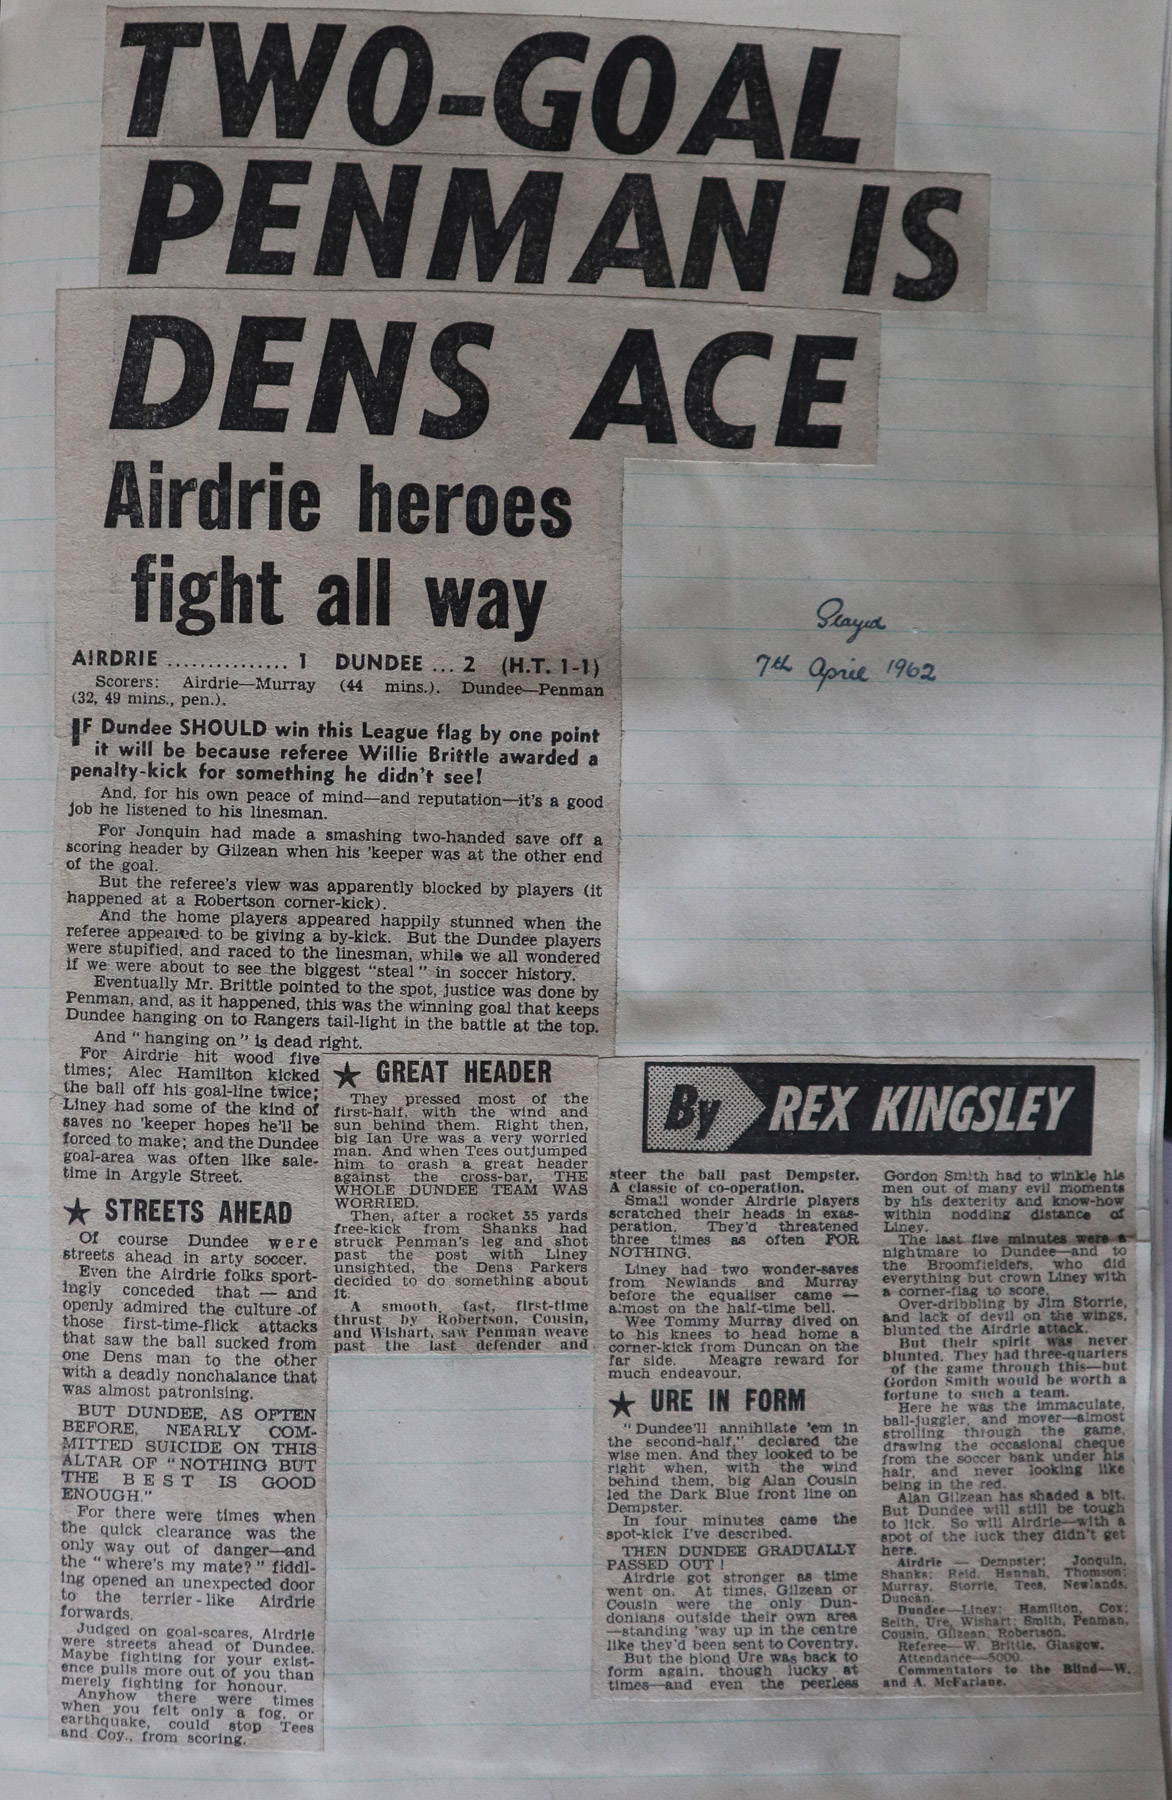 1962-04-07_Airdrieonians_1-2_Dundee_L1_1